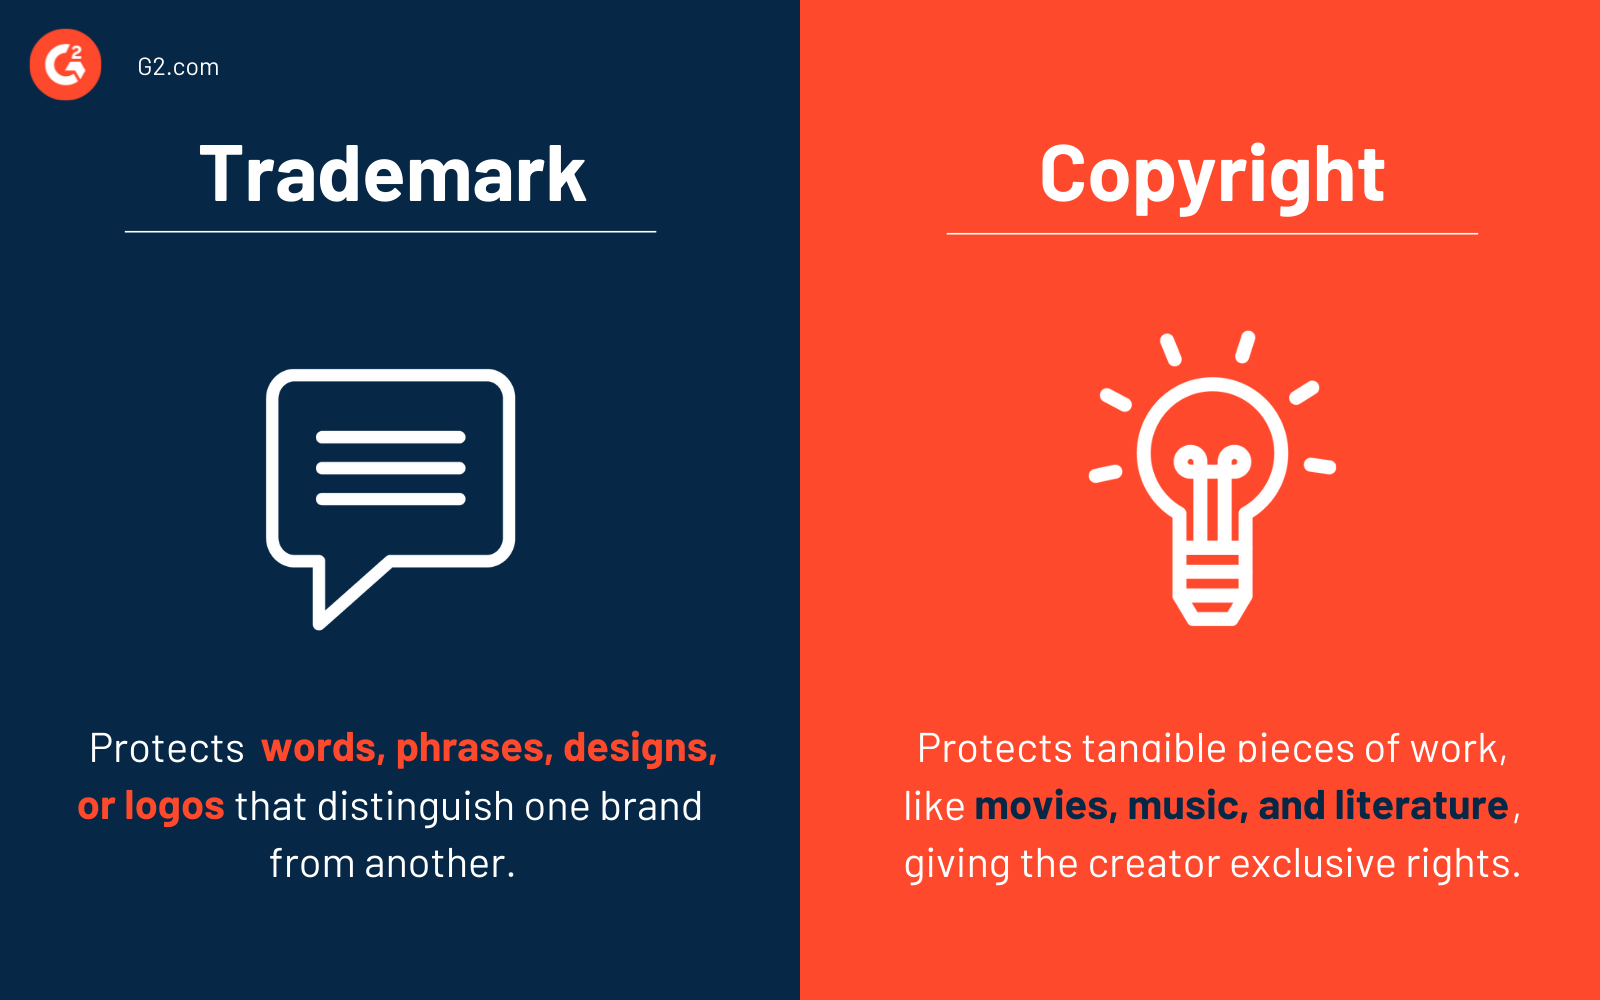 are-logos-copyrighted-or-trademarked-fabalabse